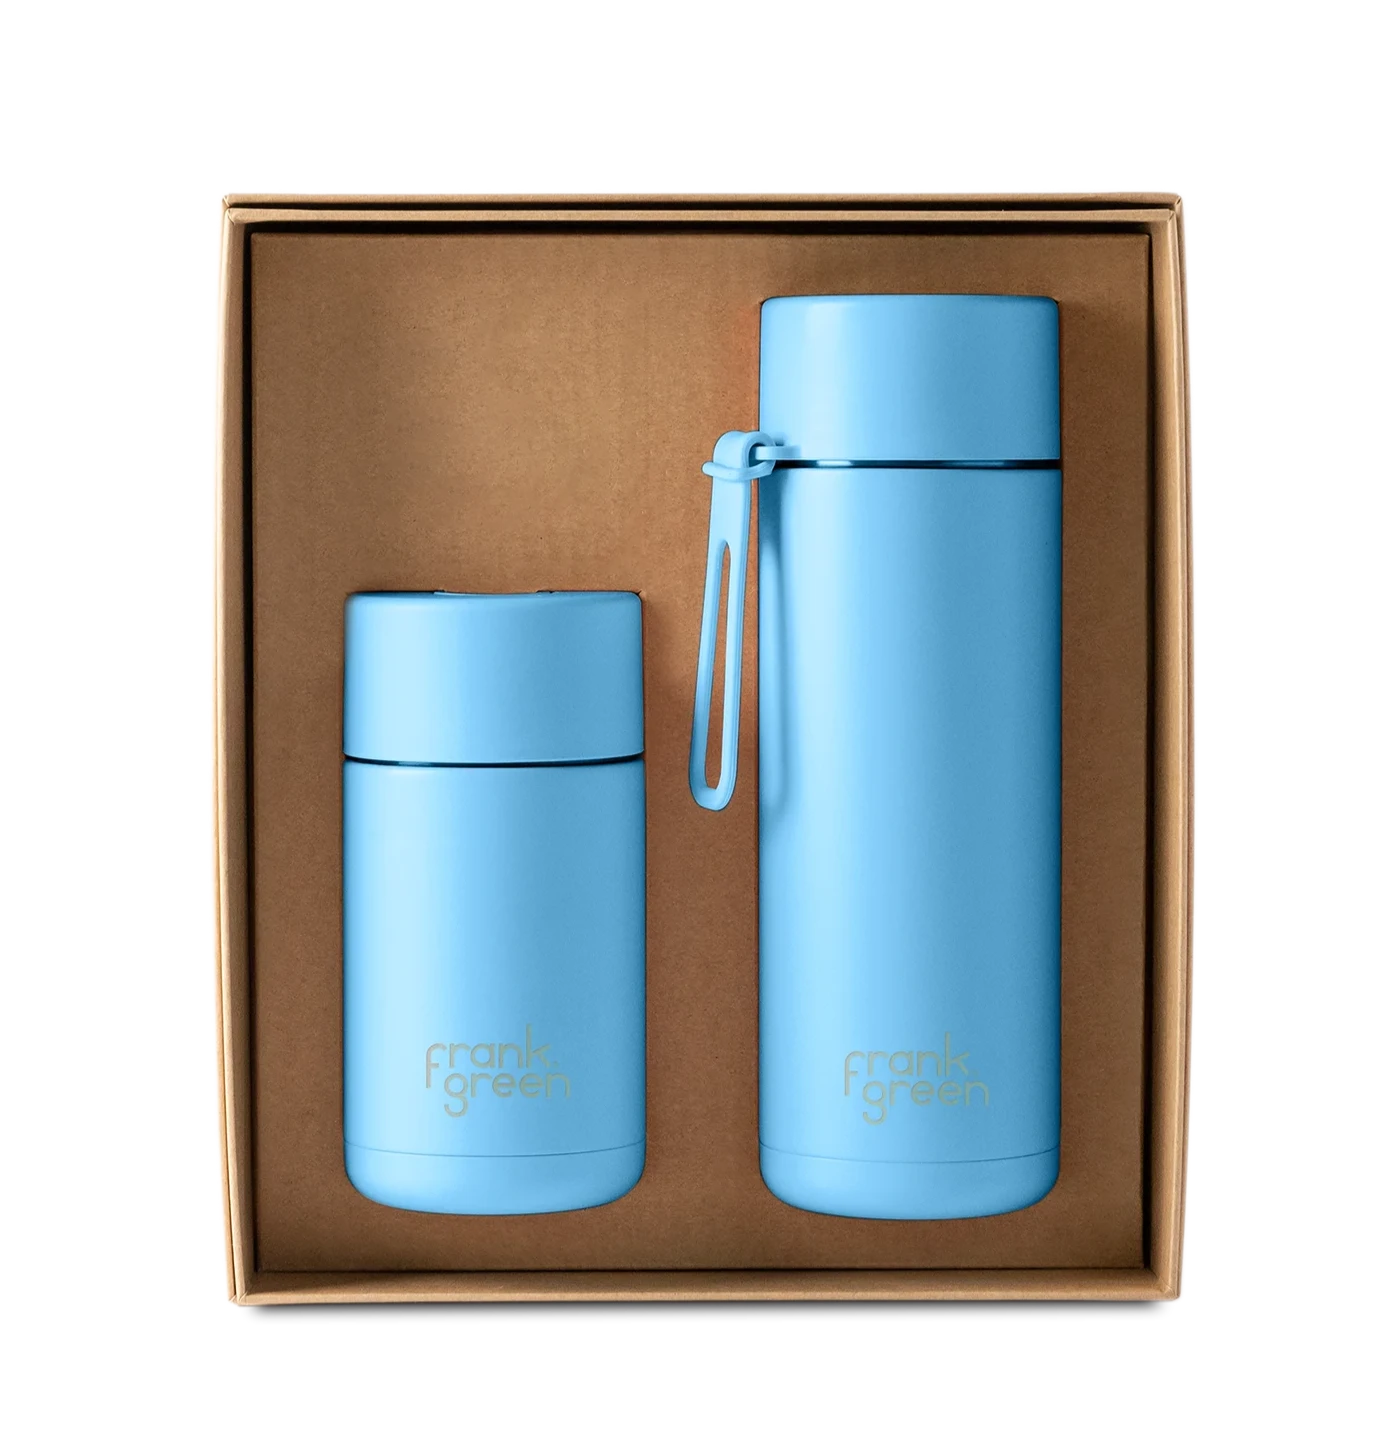 Frank Green The Essential Gift Set Small - Sky Blue Bottles Frank Green 